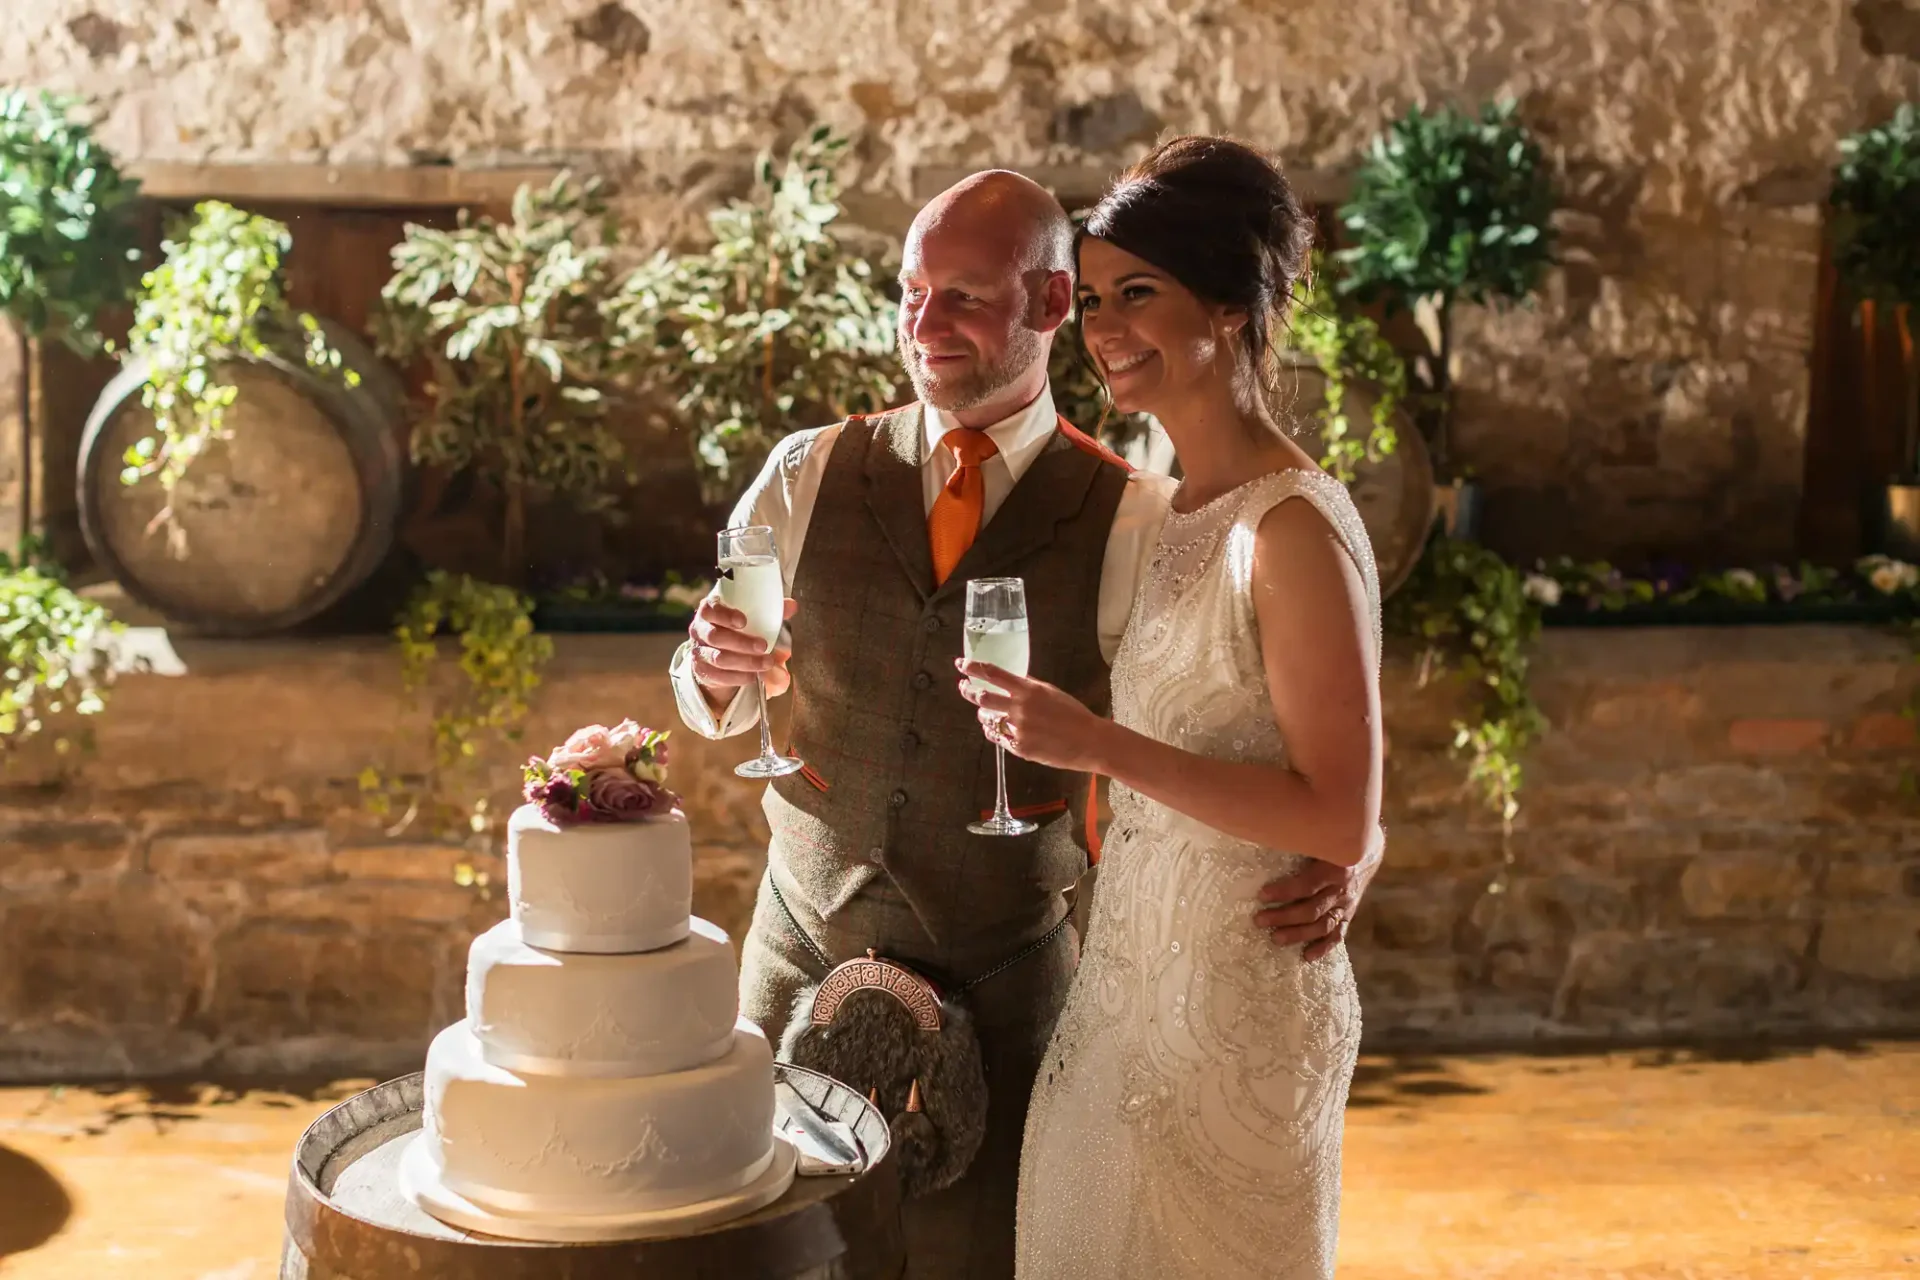 A bride and groom smiling and holding champagne flutes next to a wedding cake in a rustic indoor setting.